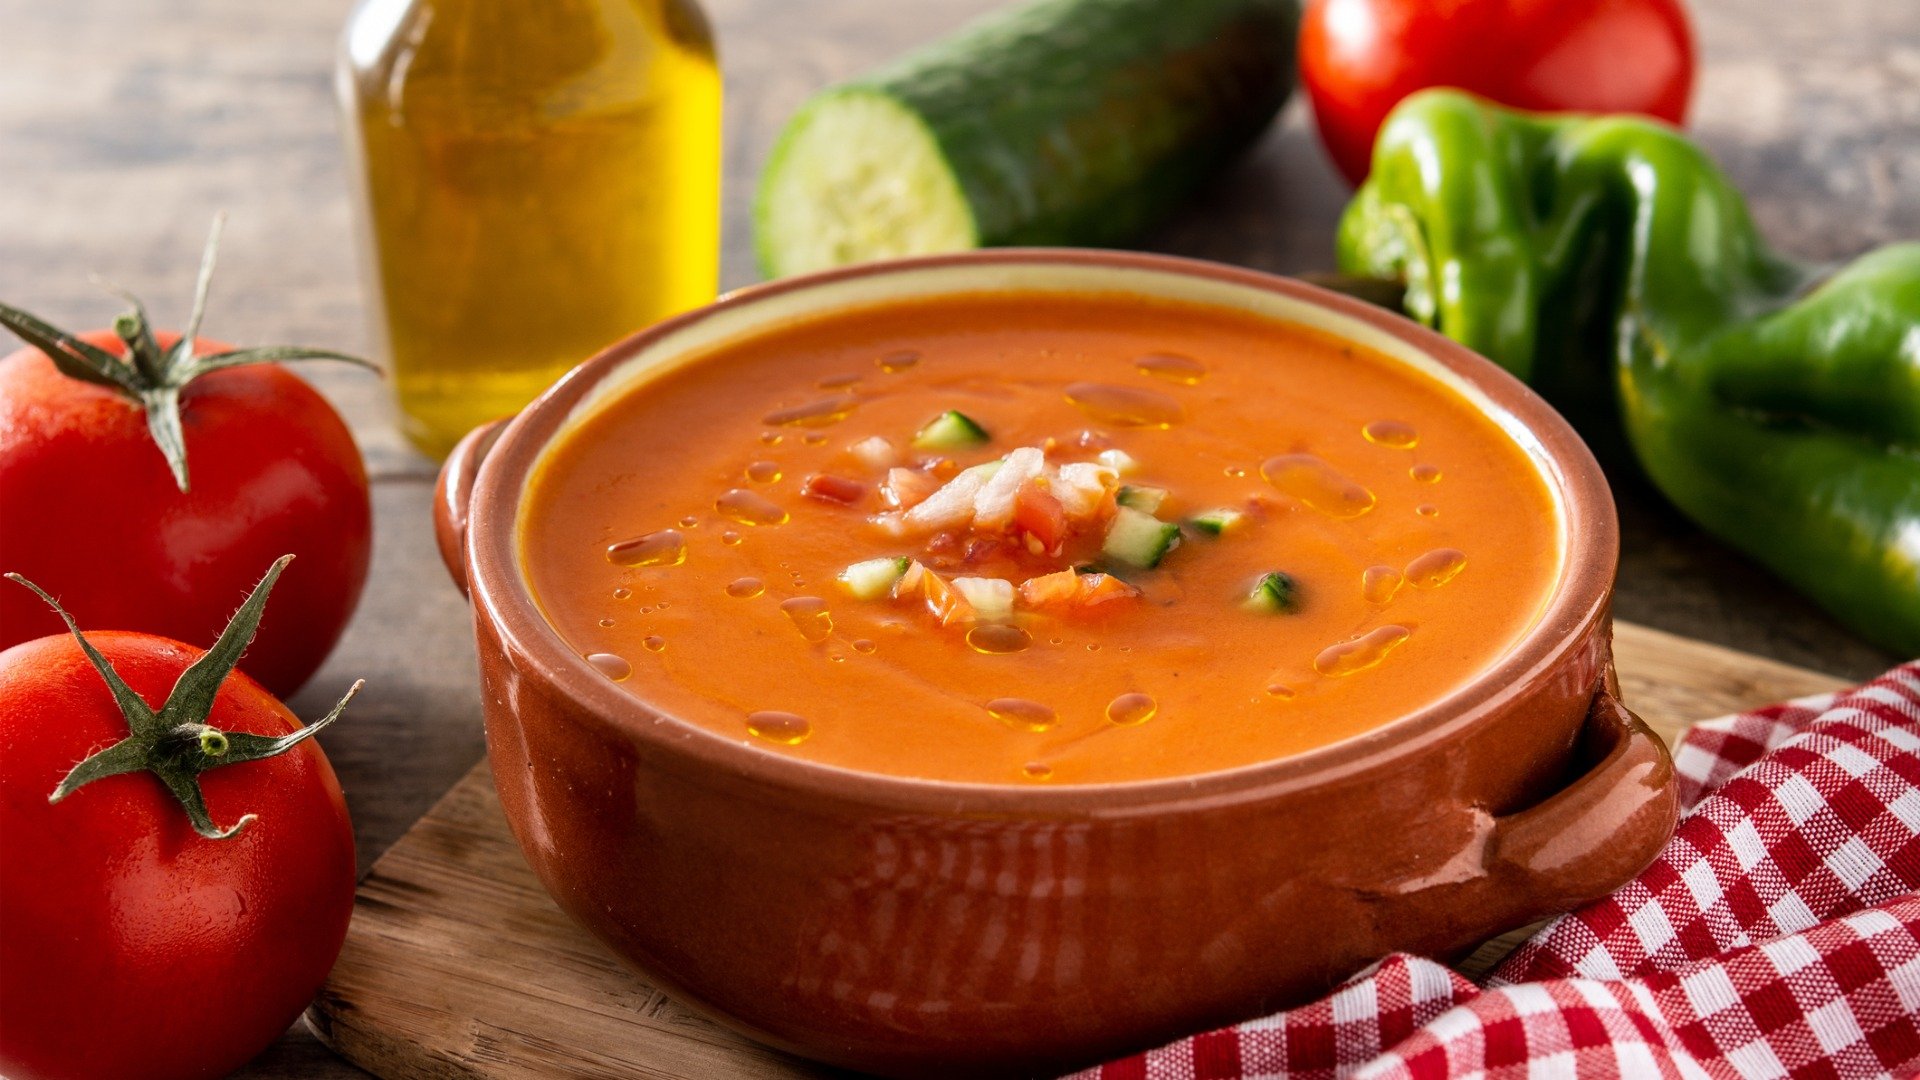 This image shows a bowl of gazpacho, among the best Spanish food you can try.